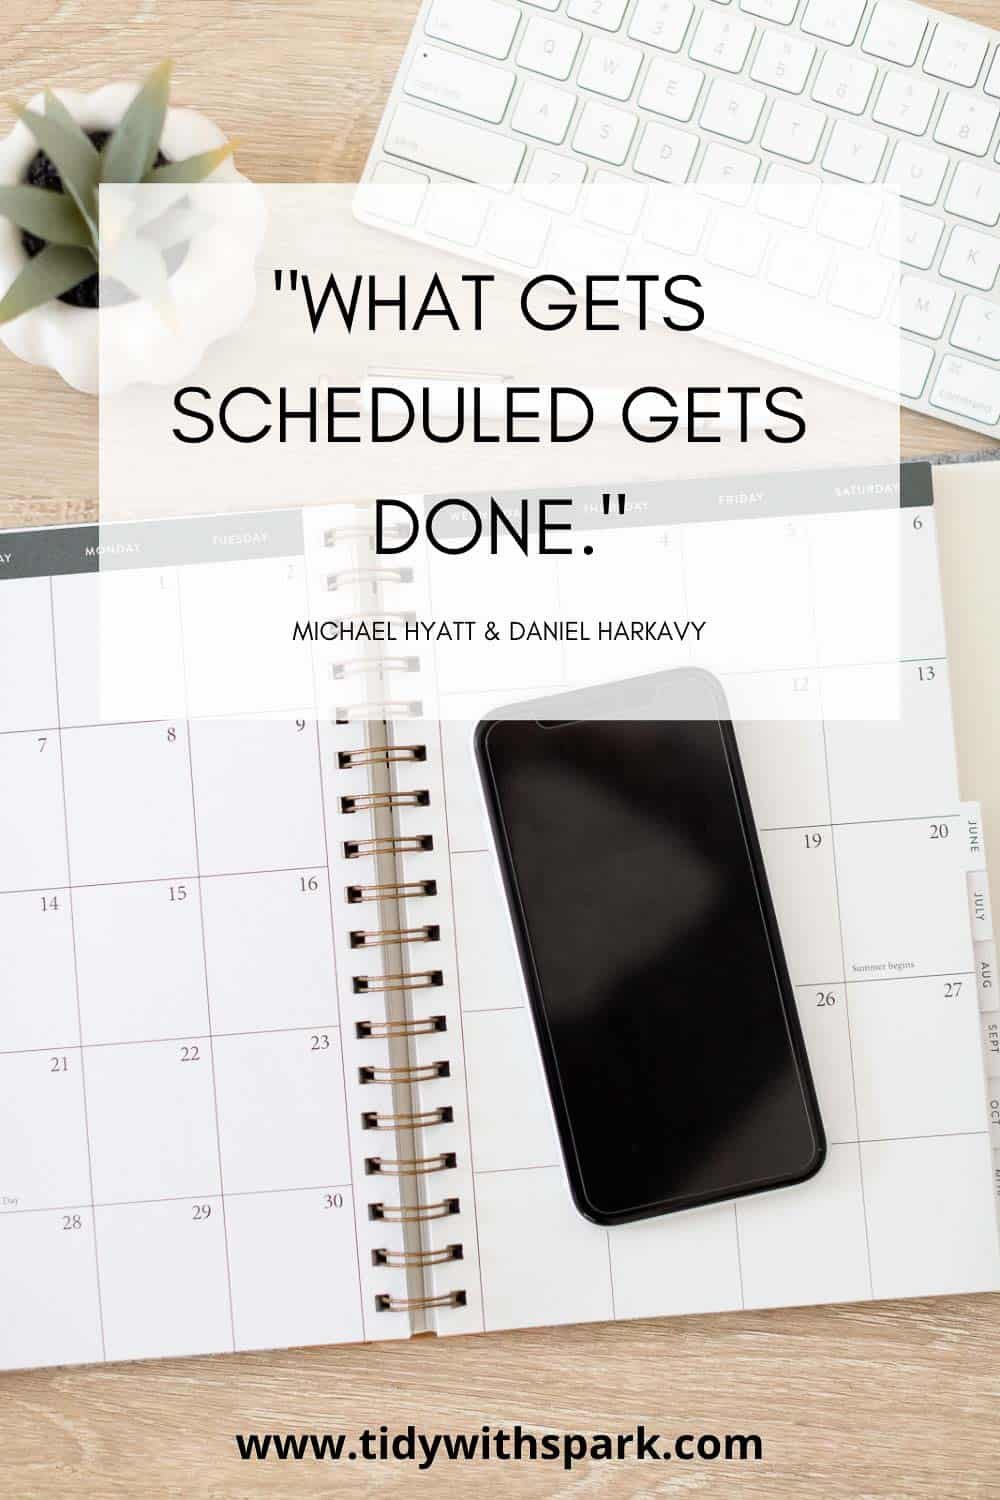 flatly of open calendar and cell phone with text overlay "what gets scheduled gets done" quote from Michael Hyatt